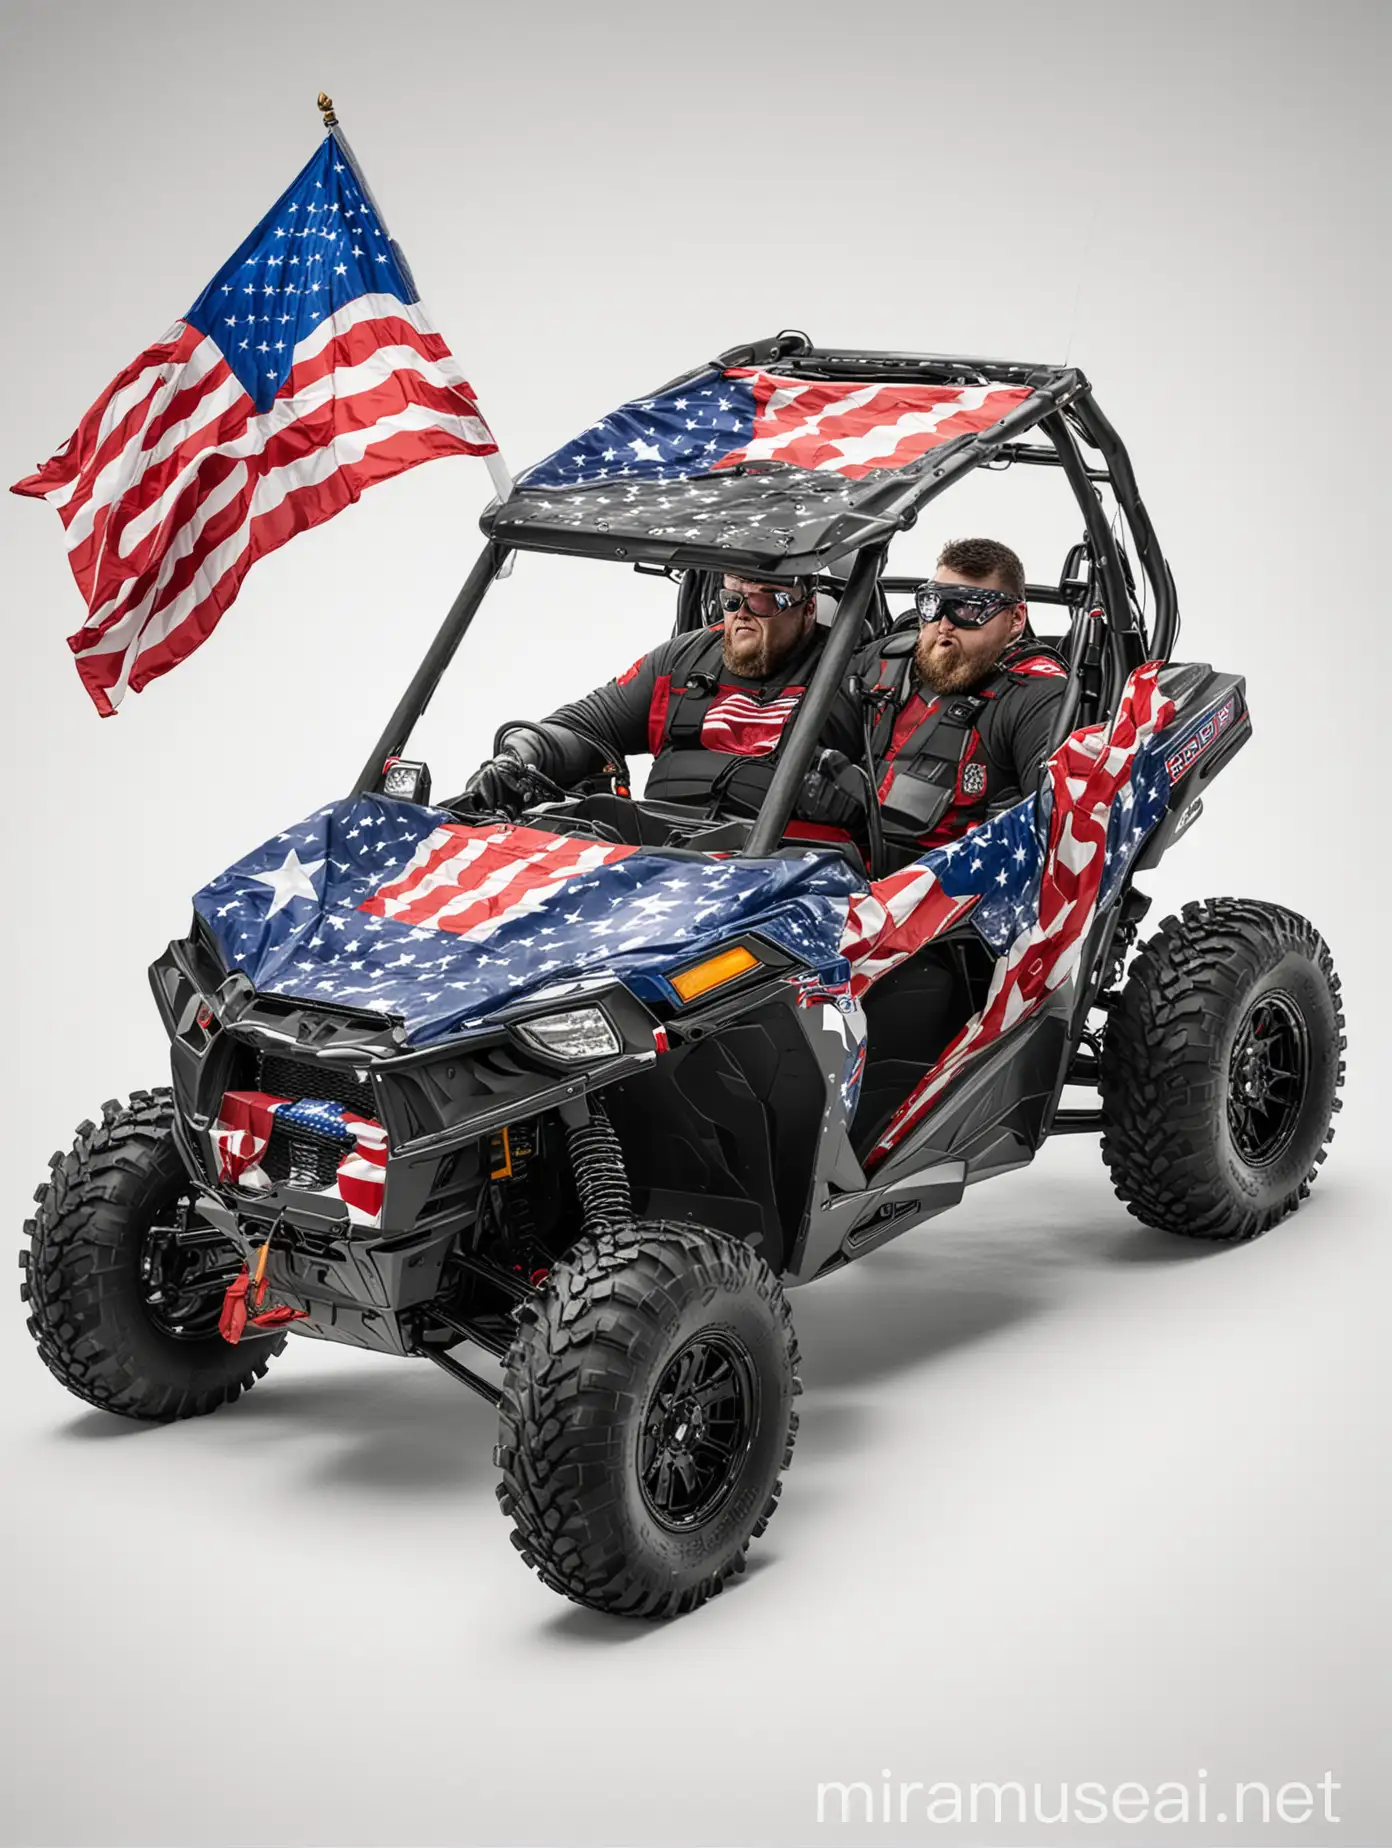 fat guy driving a polaris style RZR UTV with a USA flag attached, on a white background